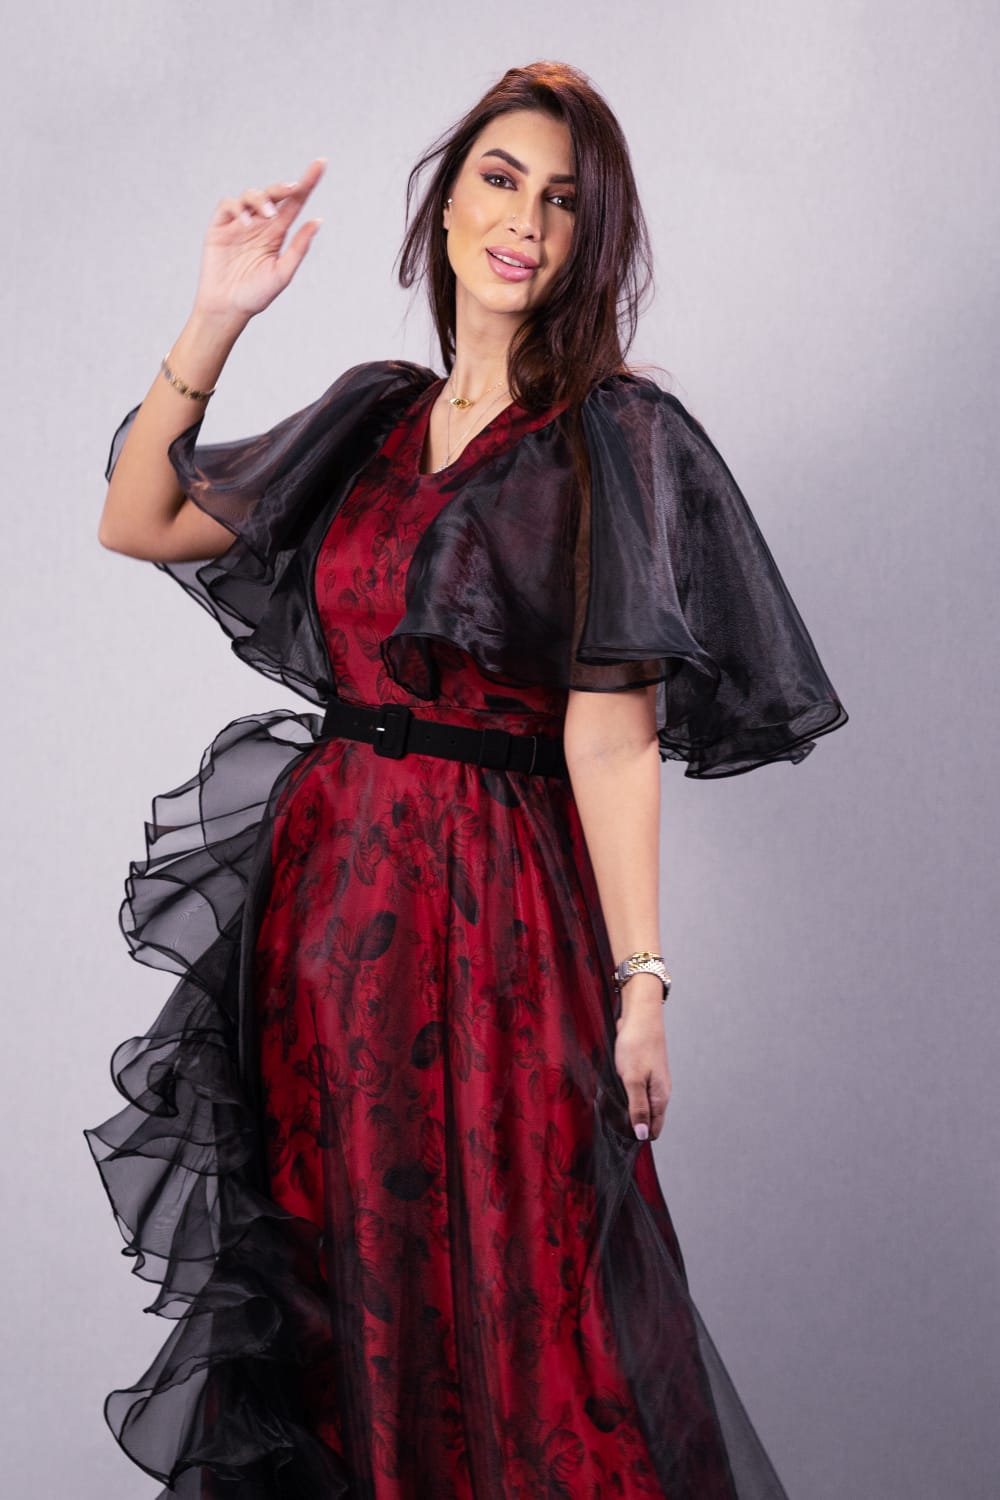 Modern organza dress with red lining and side ruffles